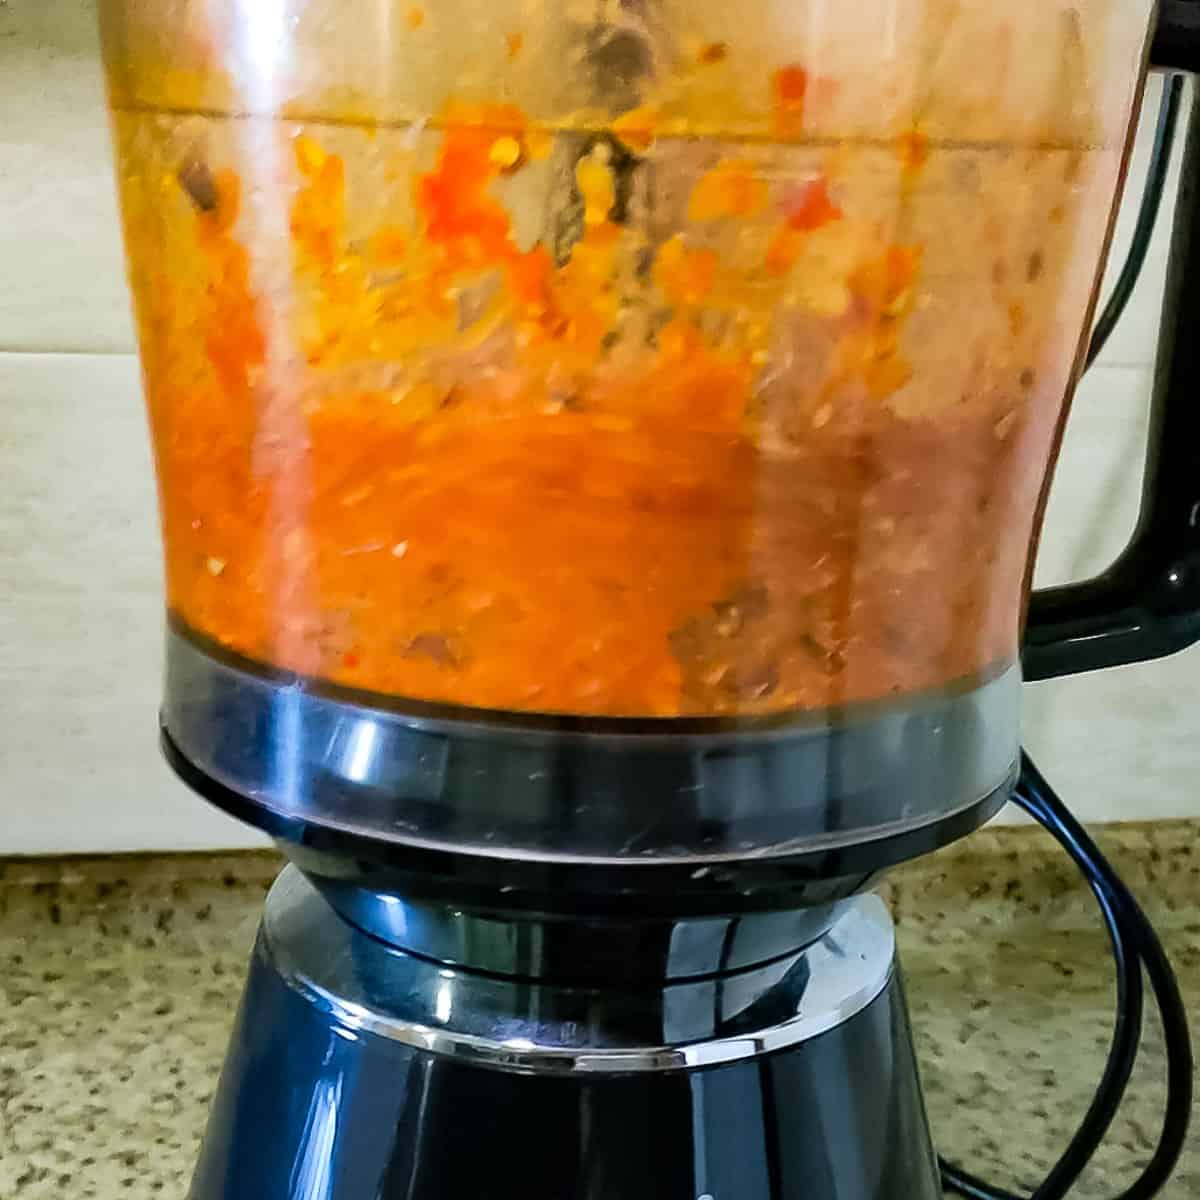 Chilli and garlic pesto being blended in a food processor.